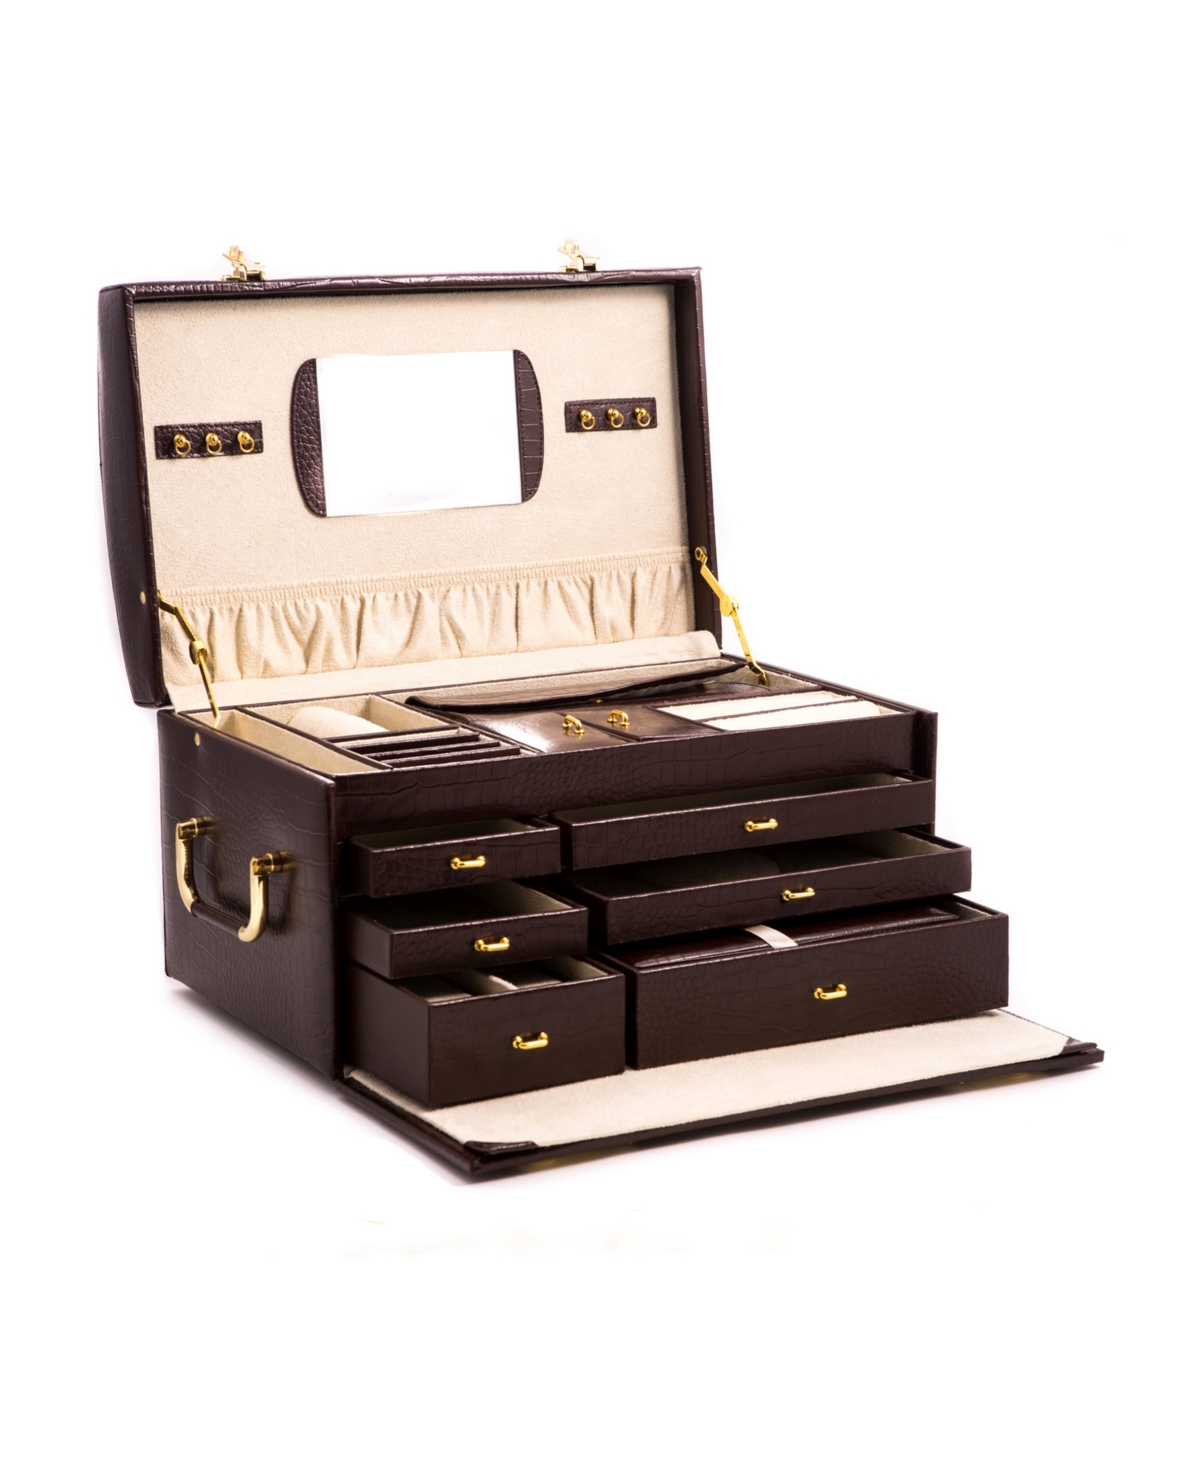 Croco Jewelry Chest with Multi Levels, 2 Removable Travel Cases, Mirror and Locking Clasps - Multi